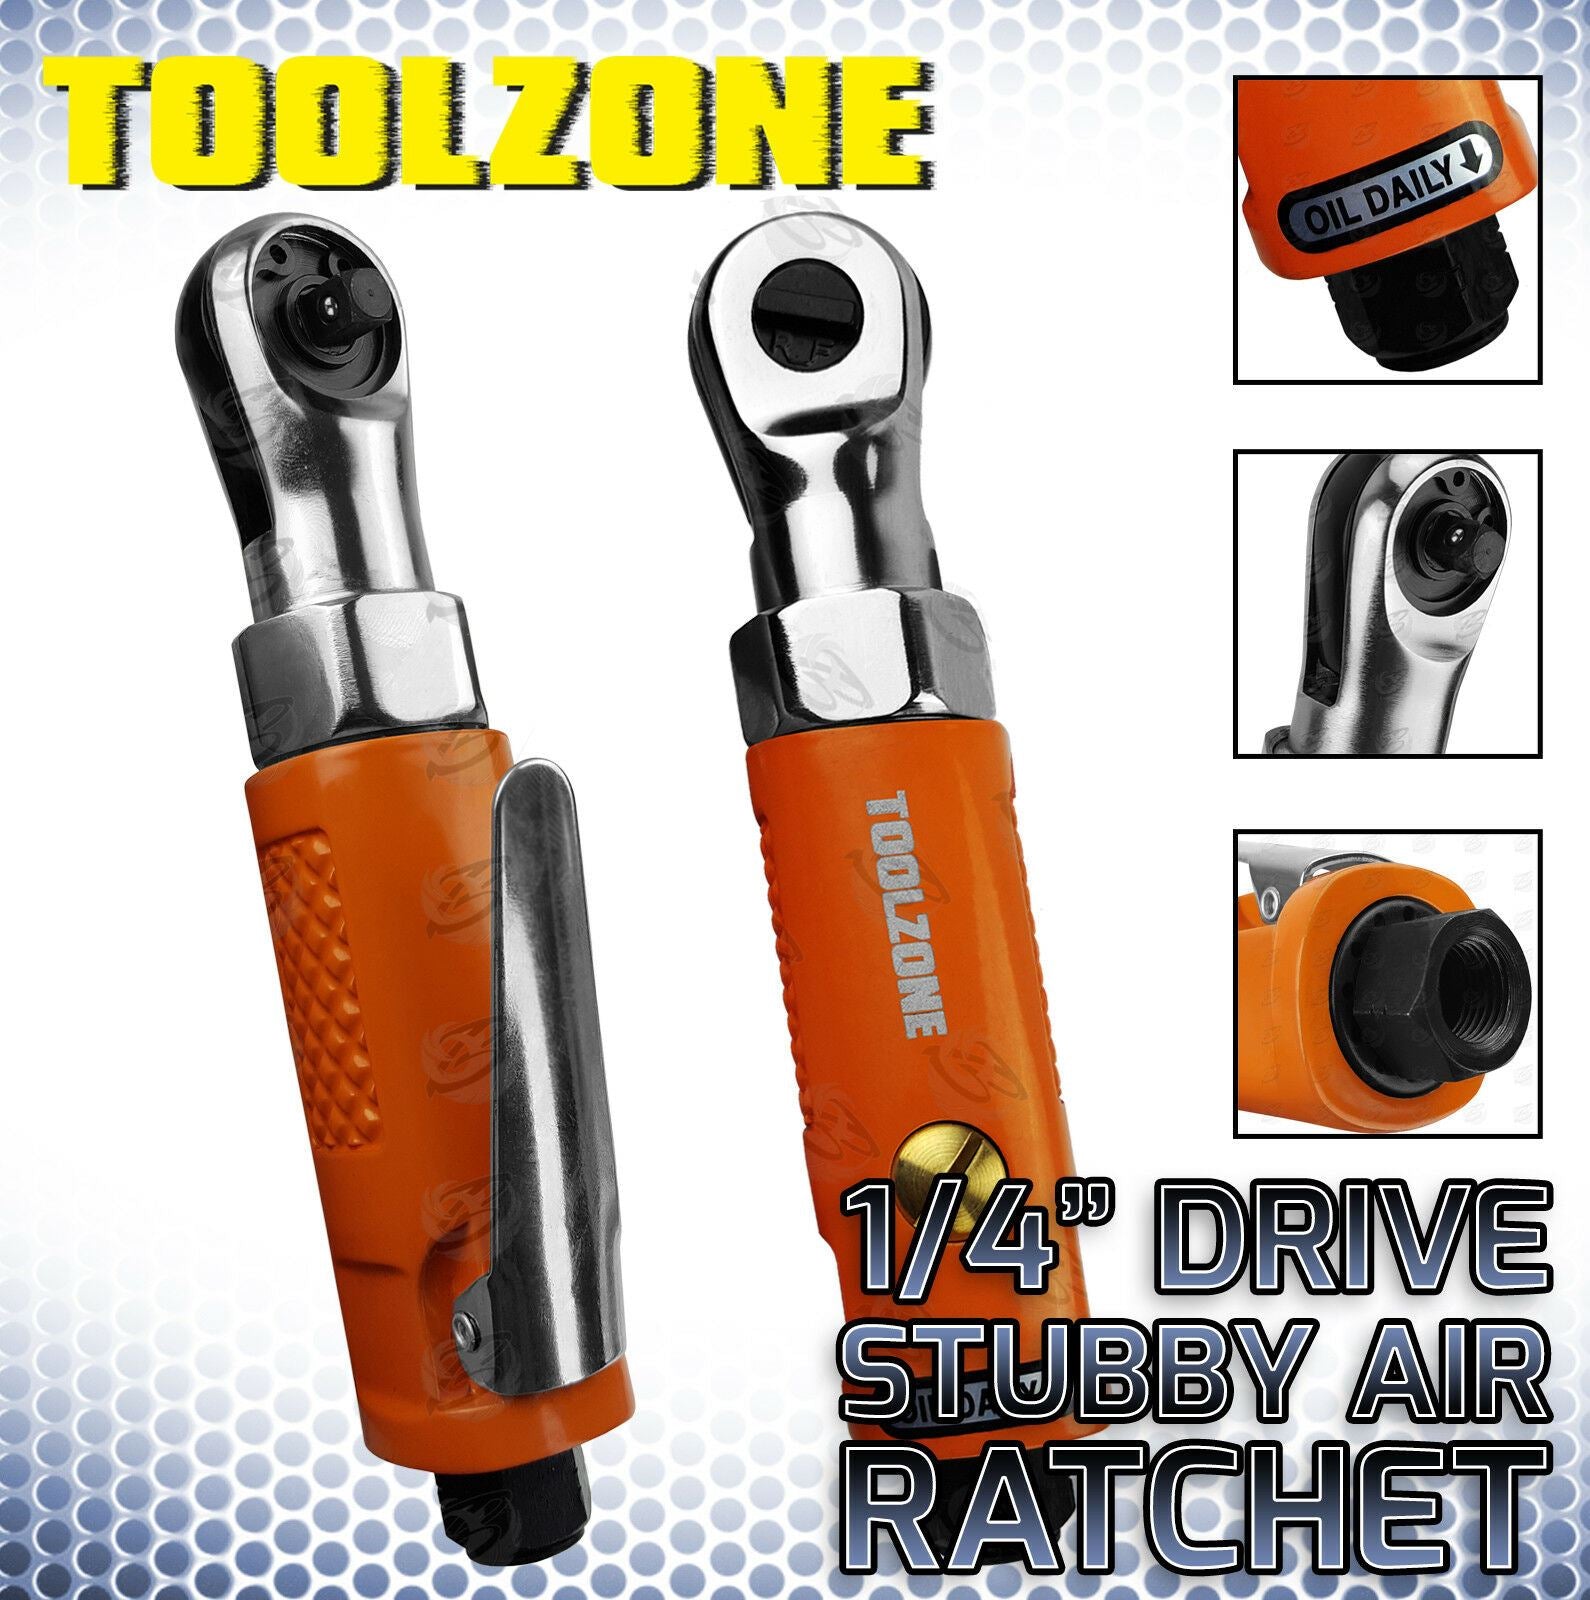 TOOLZONE 1/4" DRIVE STUBBY AIR IMPACT RATCHET WRENCH